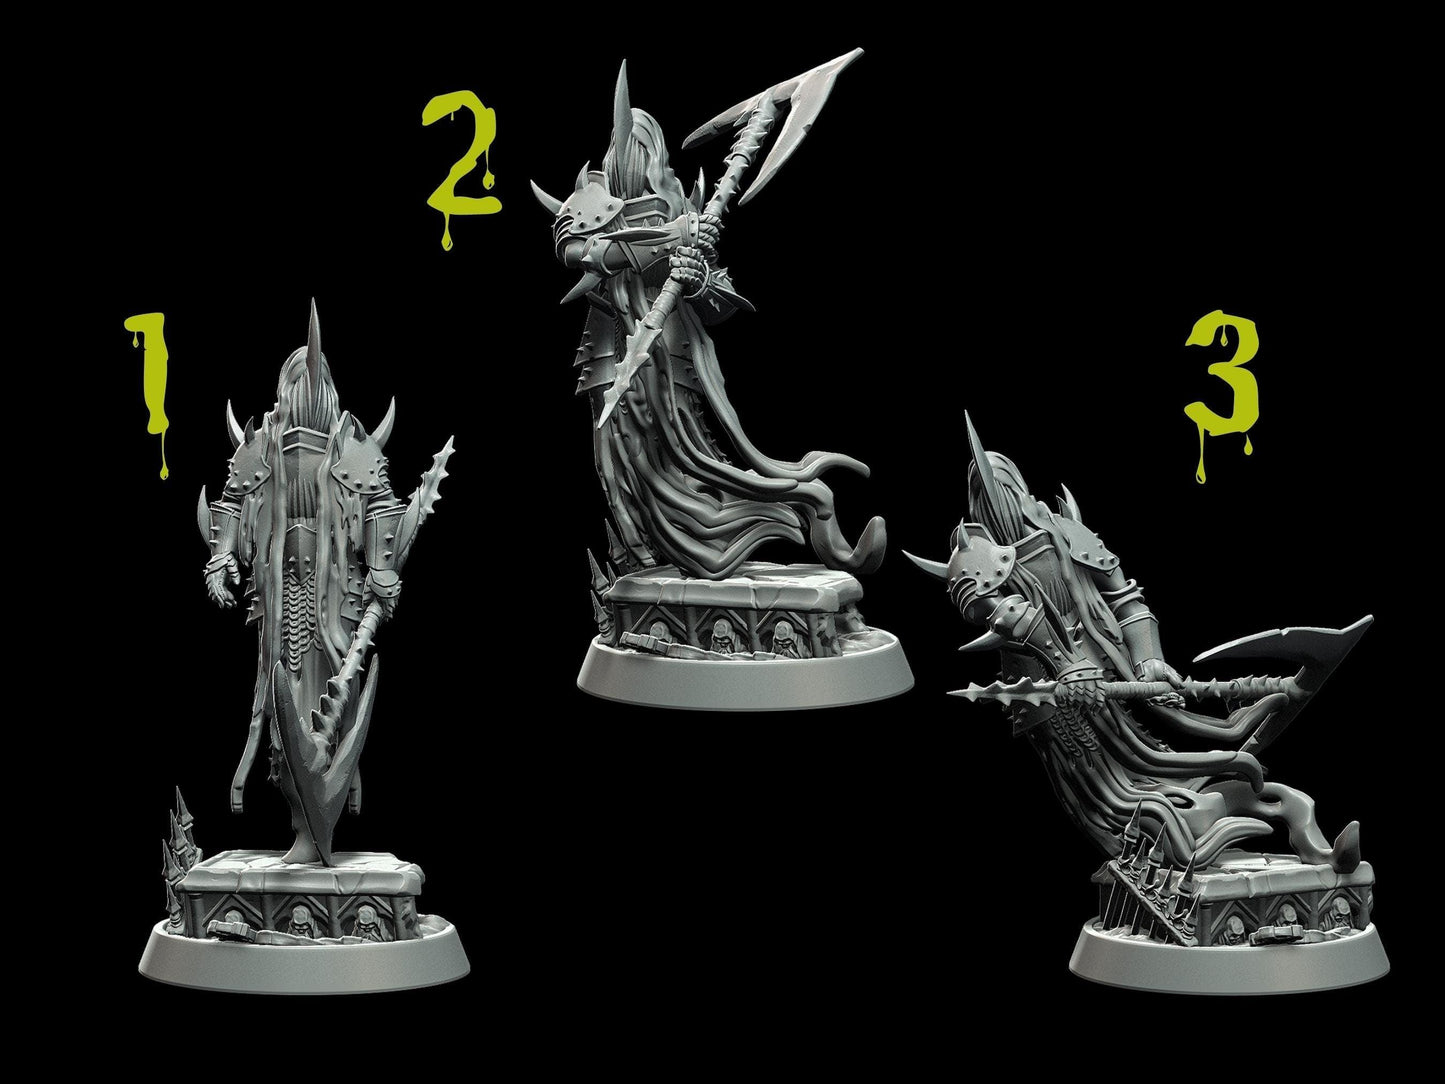 DnD Corrupted Fiend Miniature - 3 Poses - 28mm scale Tabletop gaming DnD Miniature Dungeons and Dragons dnd 5e - Plague Miniatures shop for DnD Miniatures